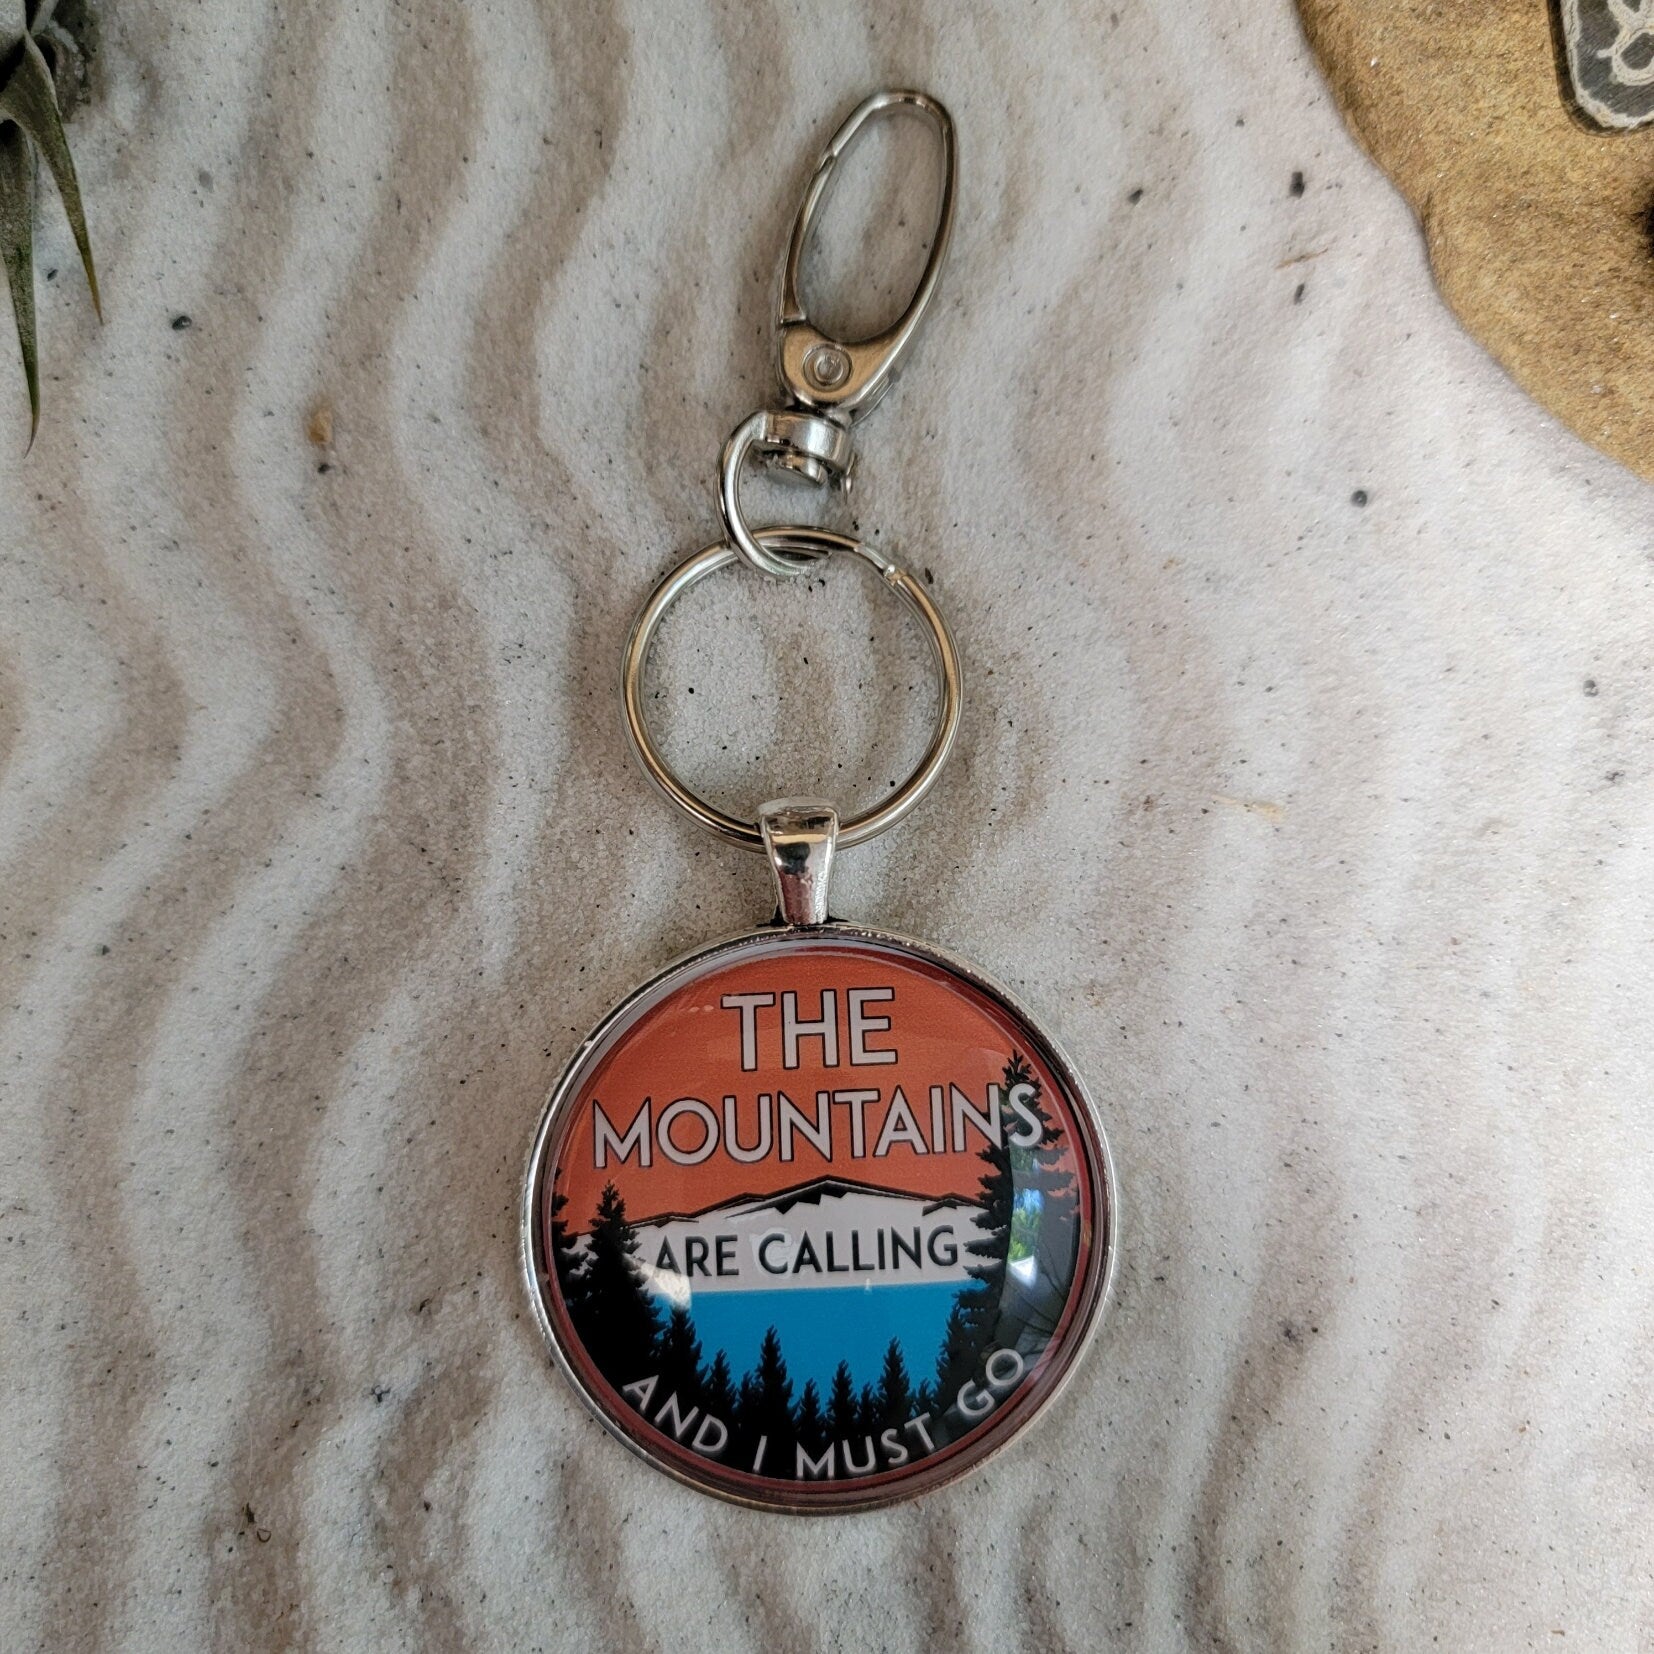 The Mountains Are Calling 1.5" Key Chain And I Must Go Metal Decal National Park Forest